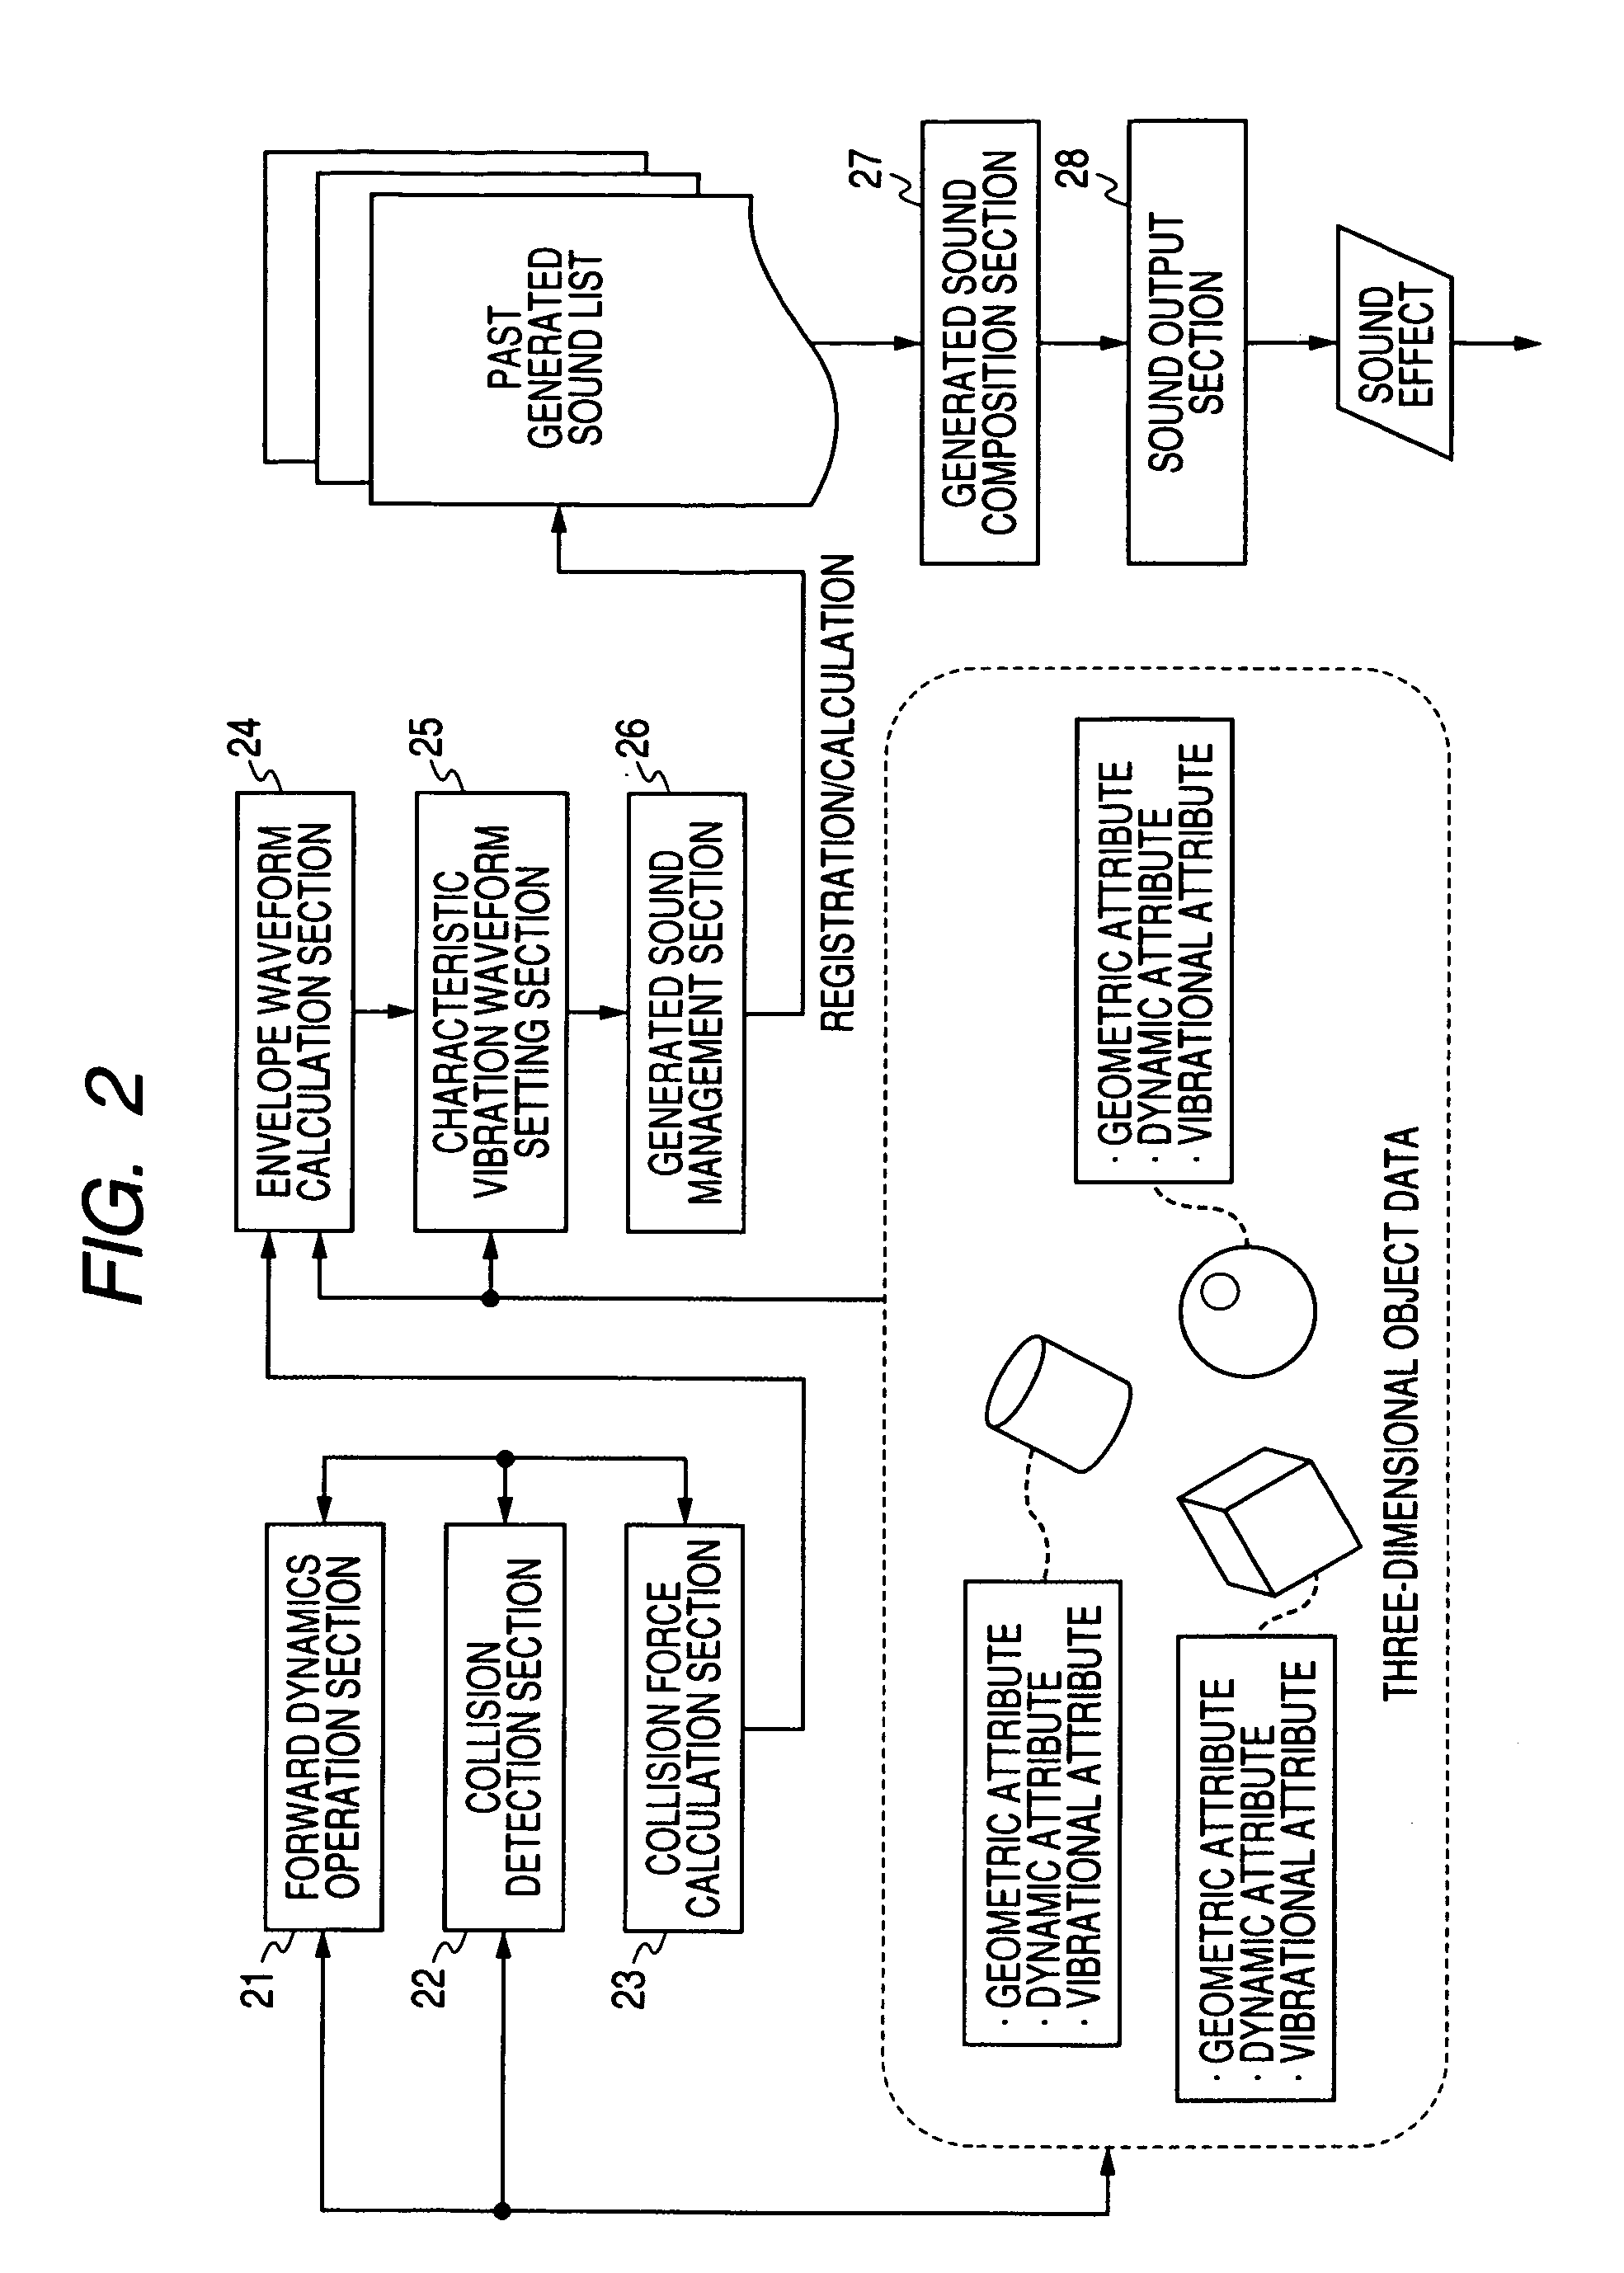 Sound effects generation device, sound effects generation method, and computer program product